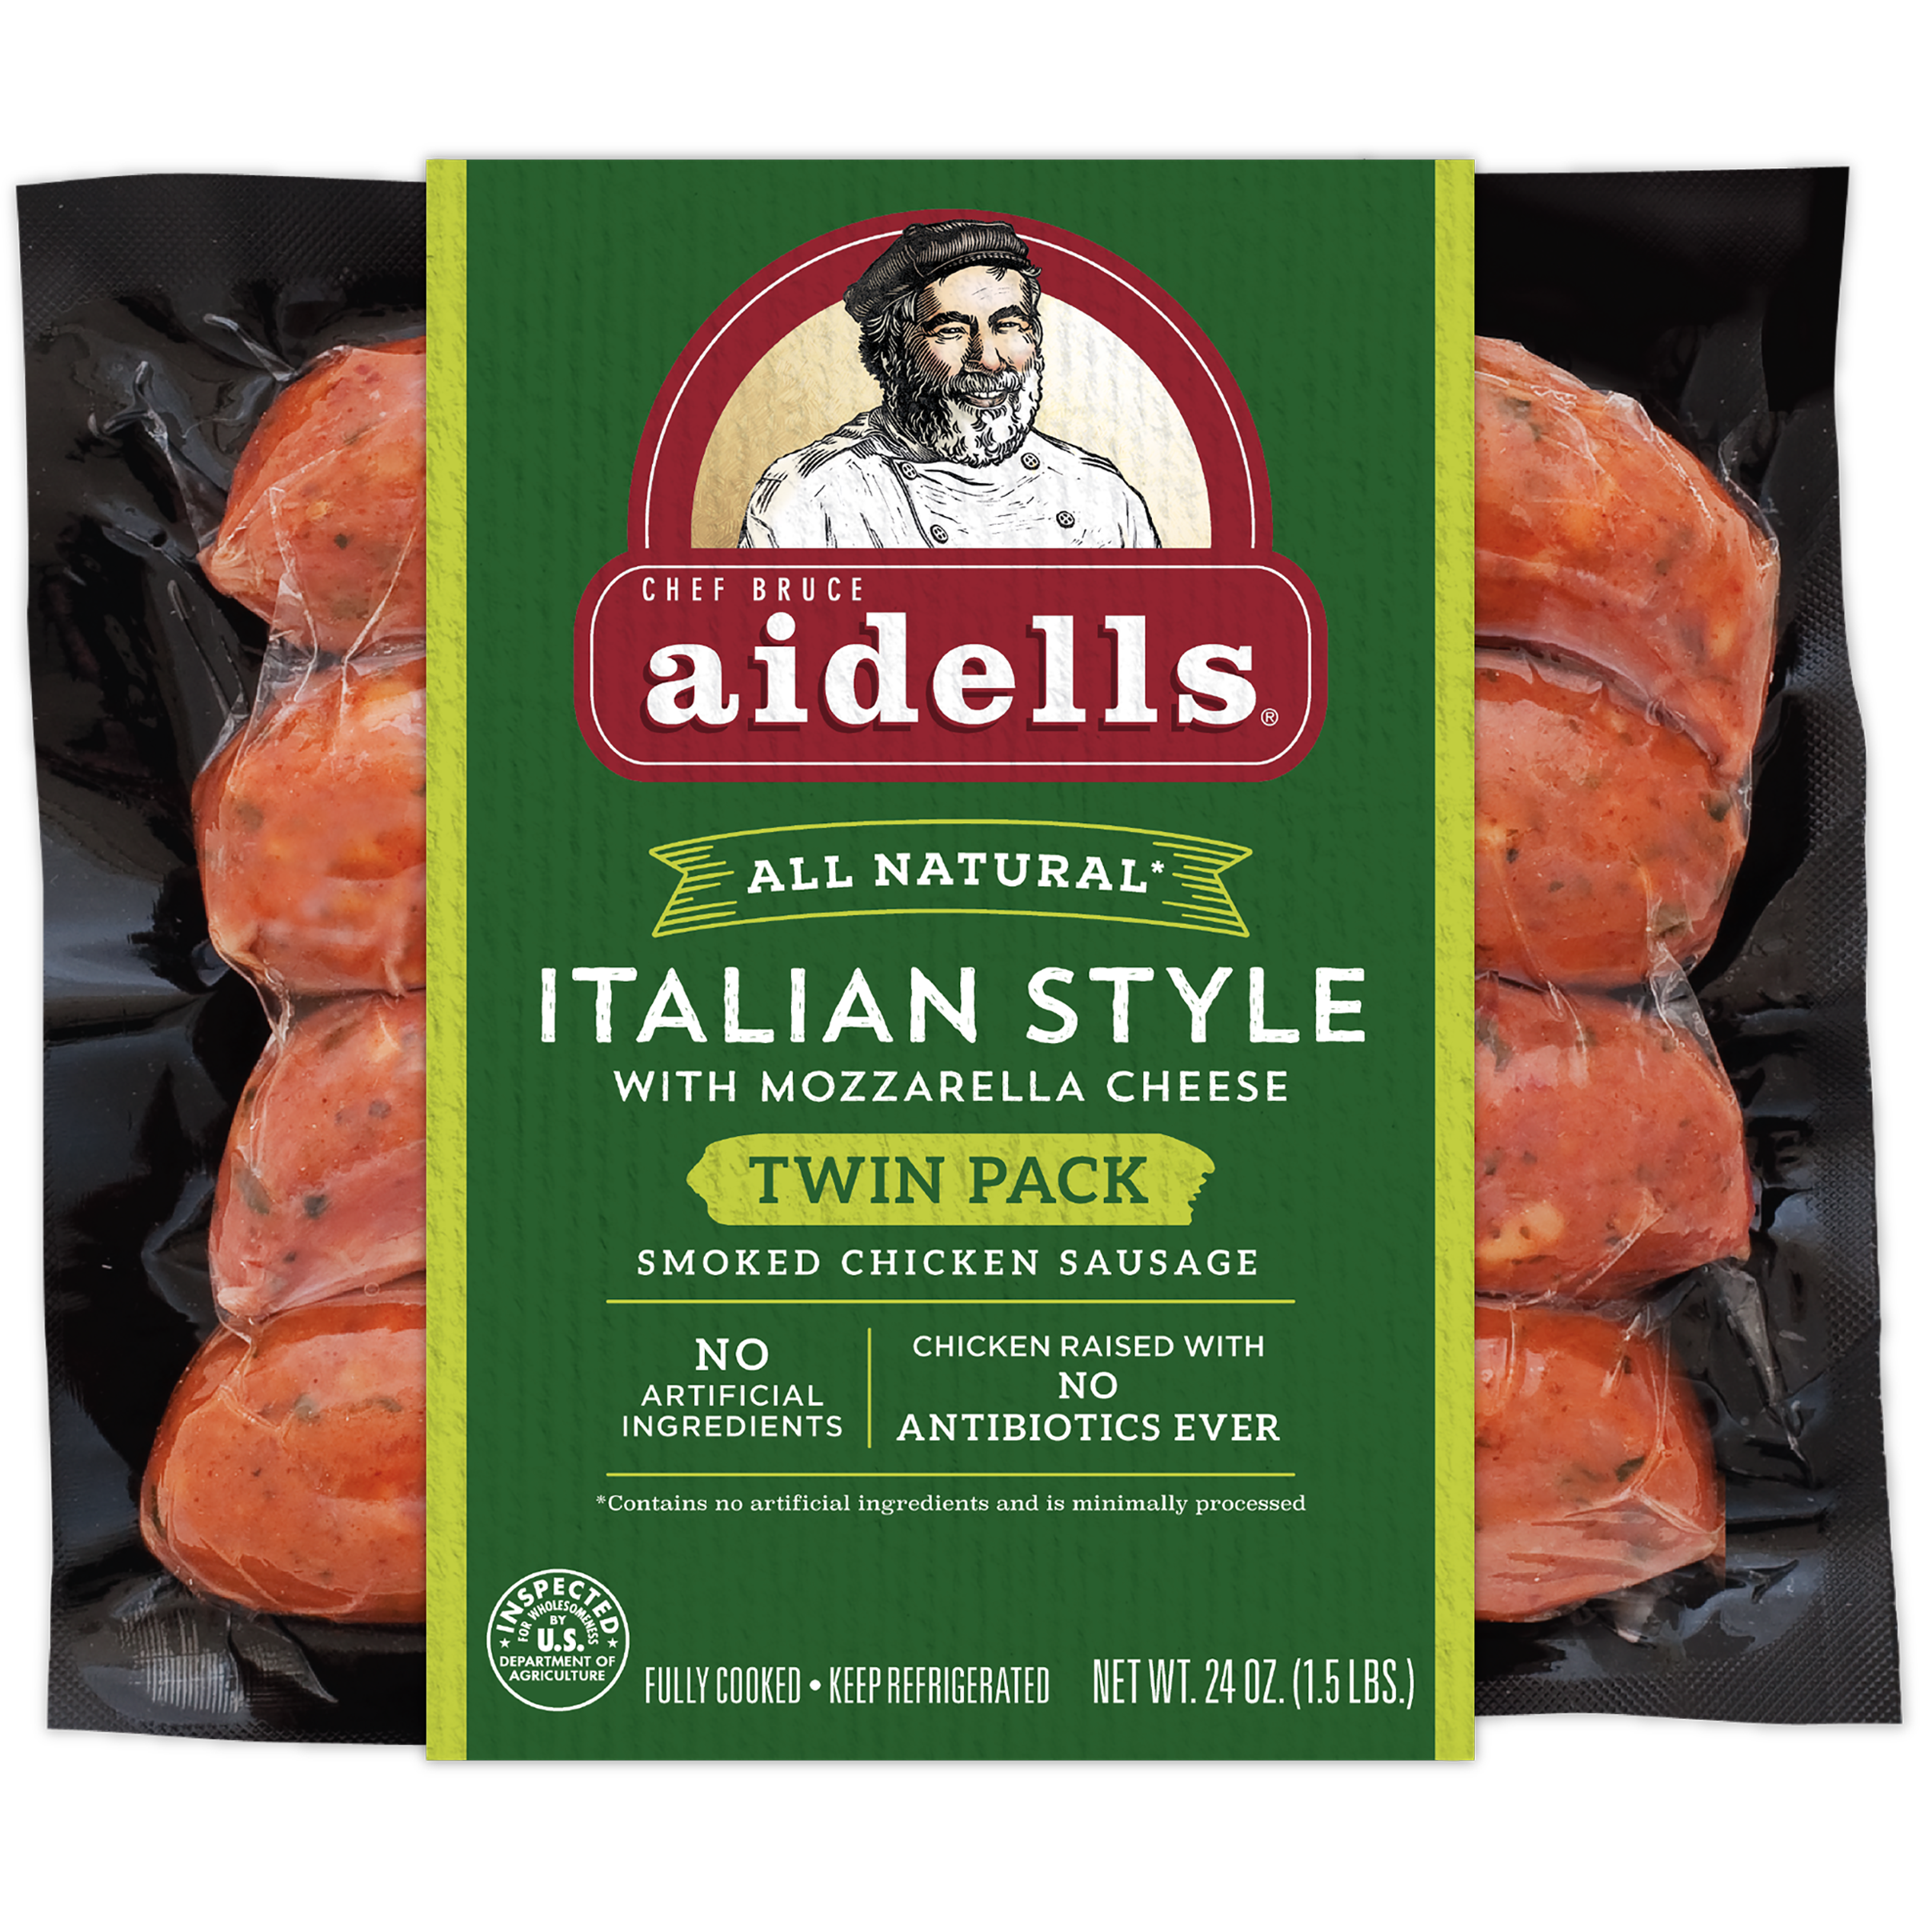 slide 1 of 5, Aidells Smoked Chicken Sausage, Italian Style with Mozzarella Cheese, Twin Pack, 24 oz. (8 Fully Cooked Links), 680.39 g